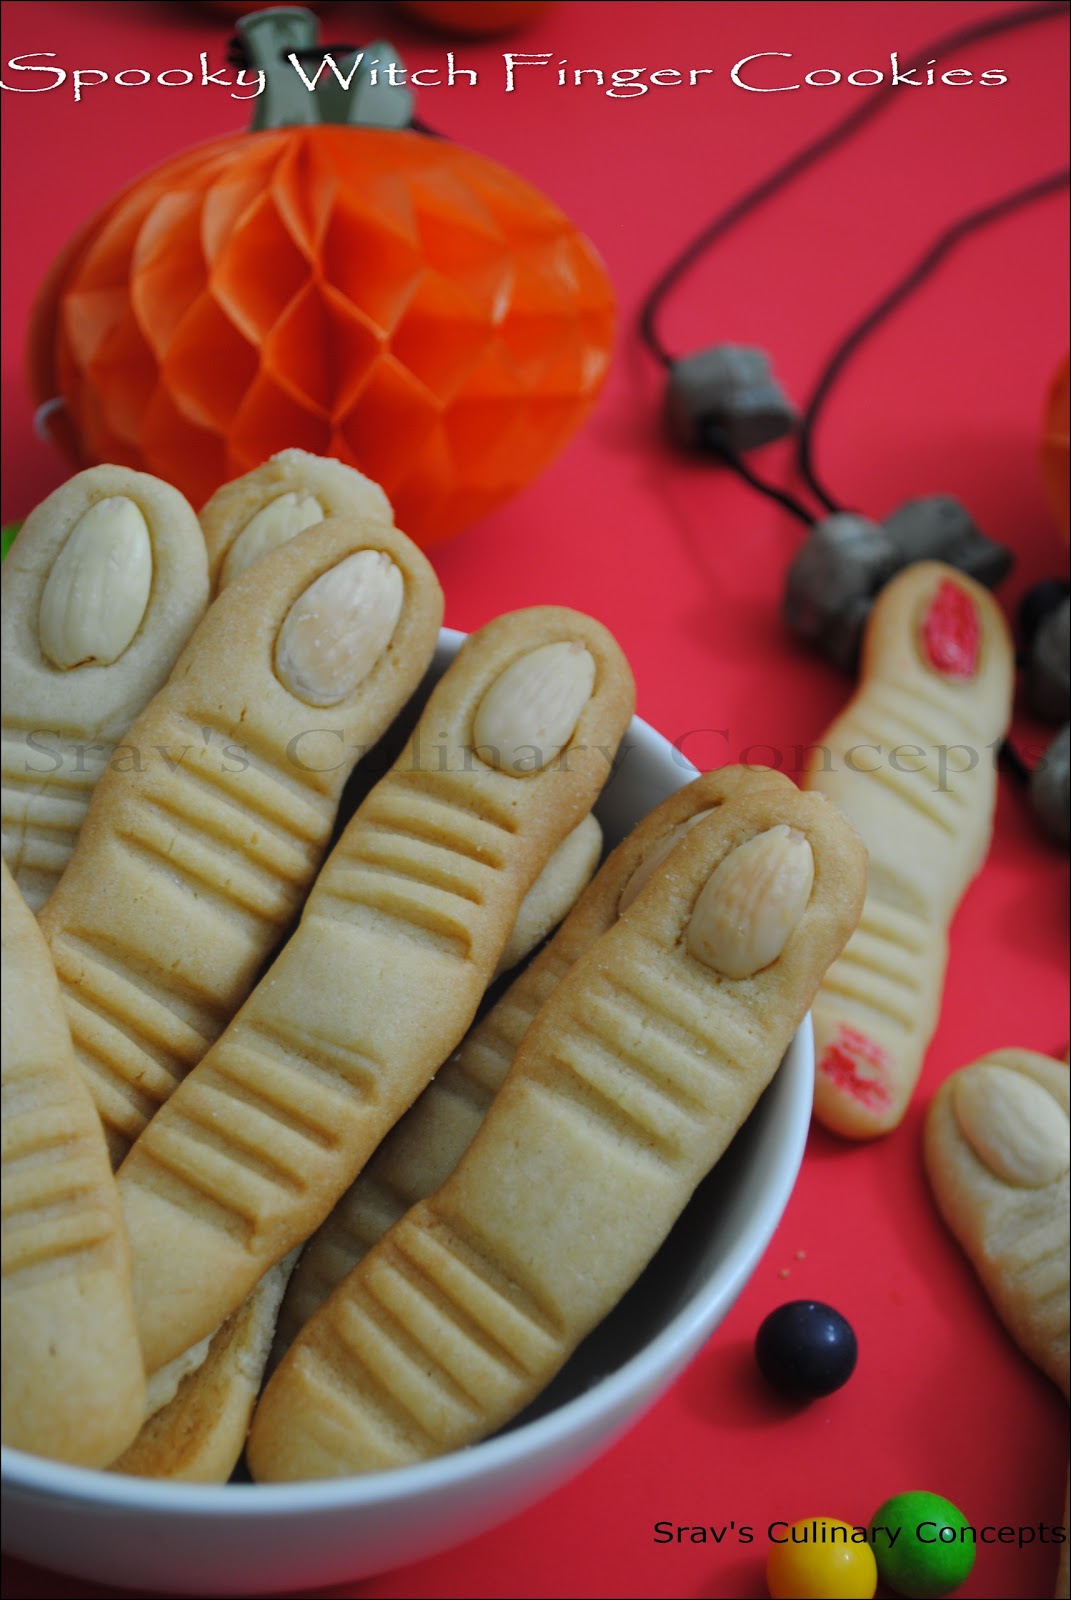 Srav's Culinary Concepts: Spooky Witch Finger Cookies – Halloween Threat